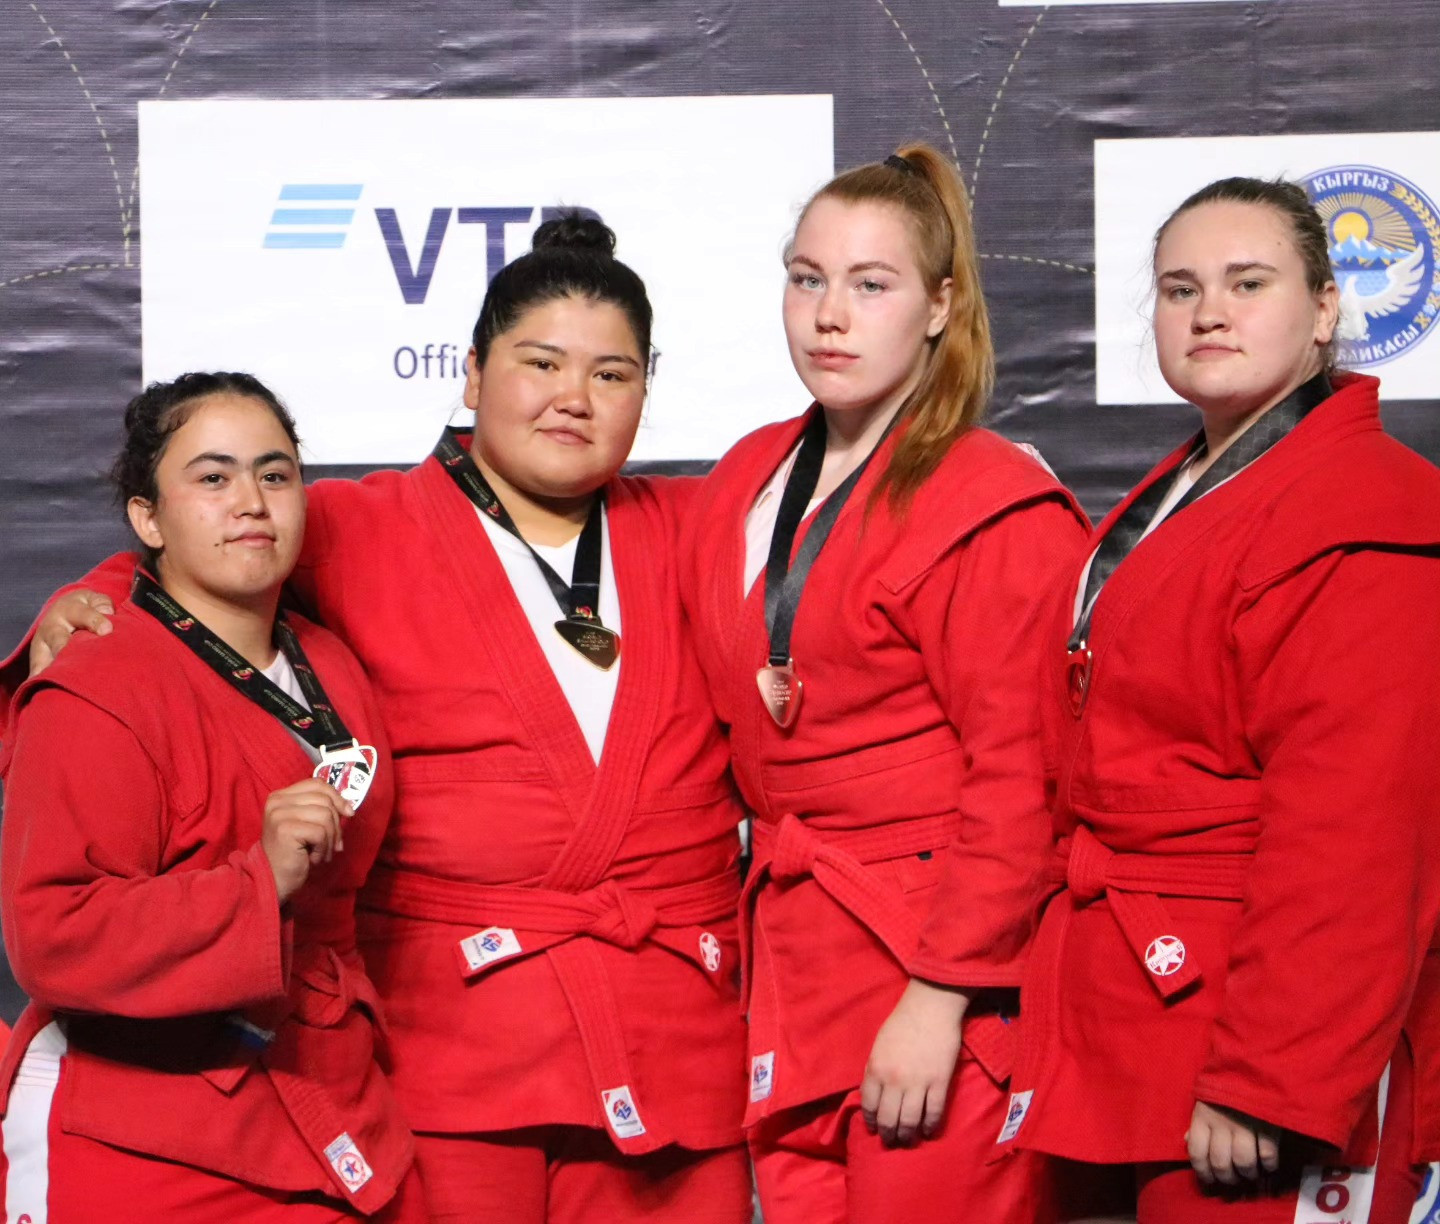 Abenova stops neutral monopoly of women's events at World Sambo Cup